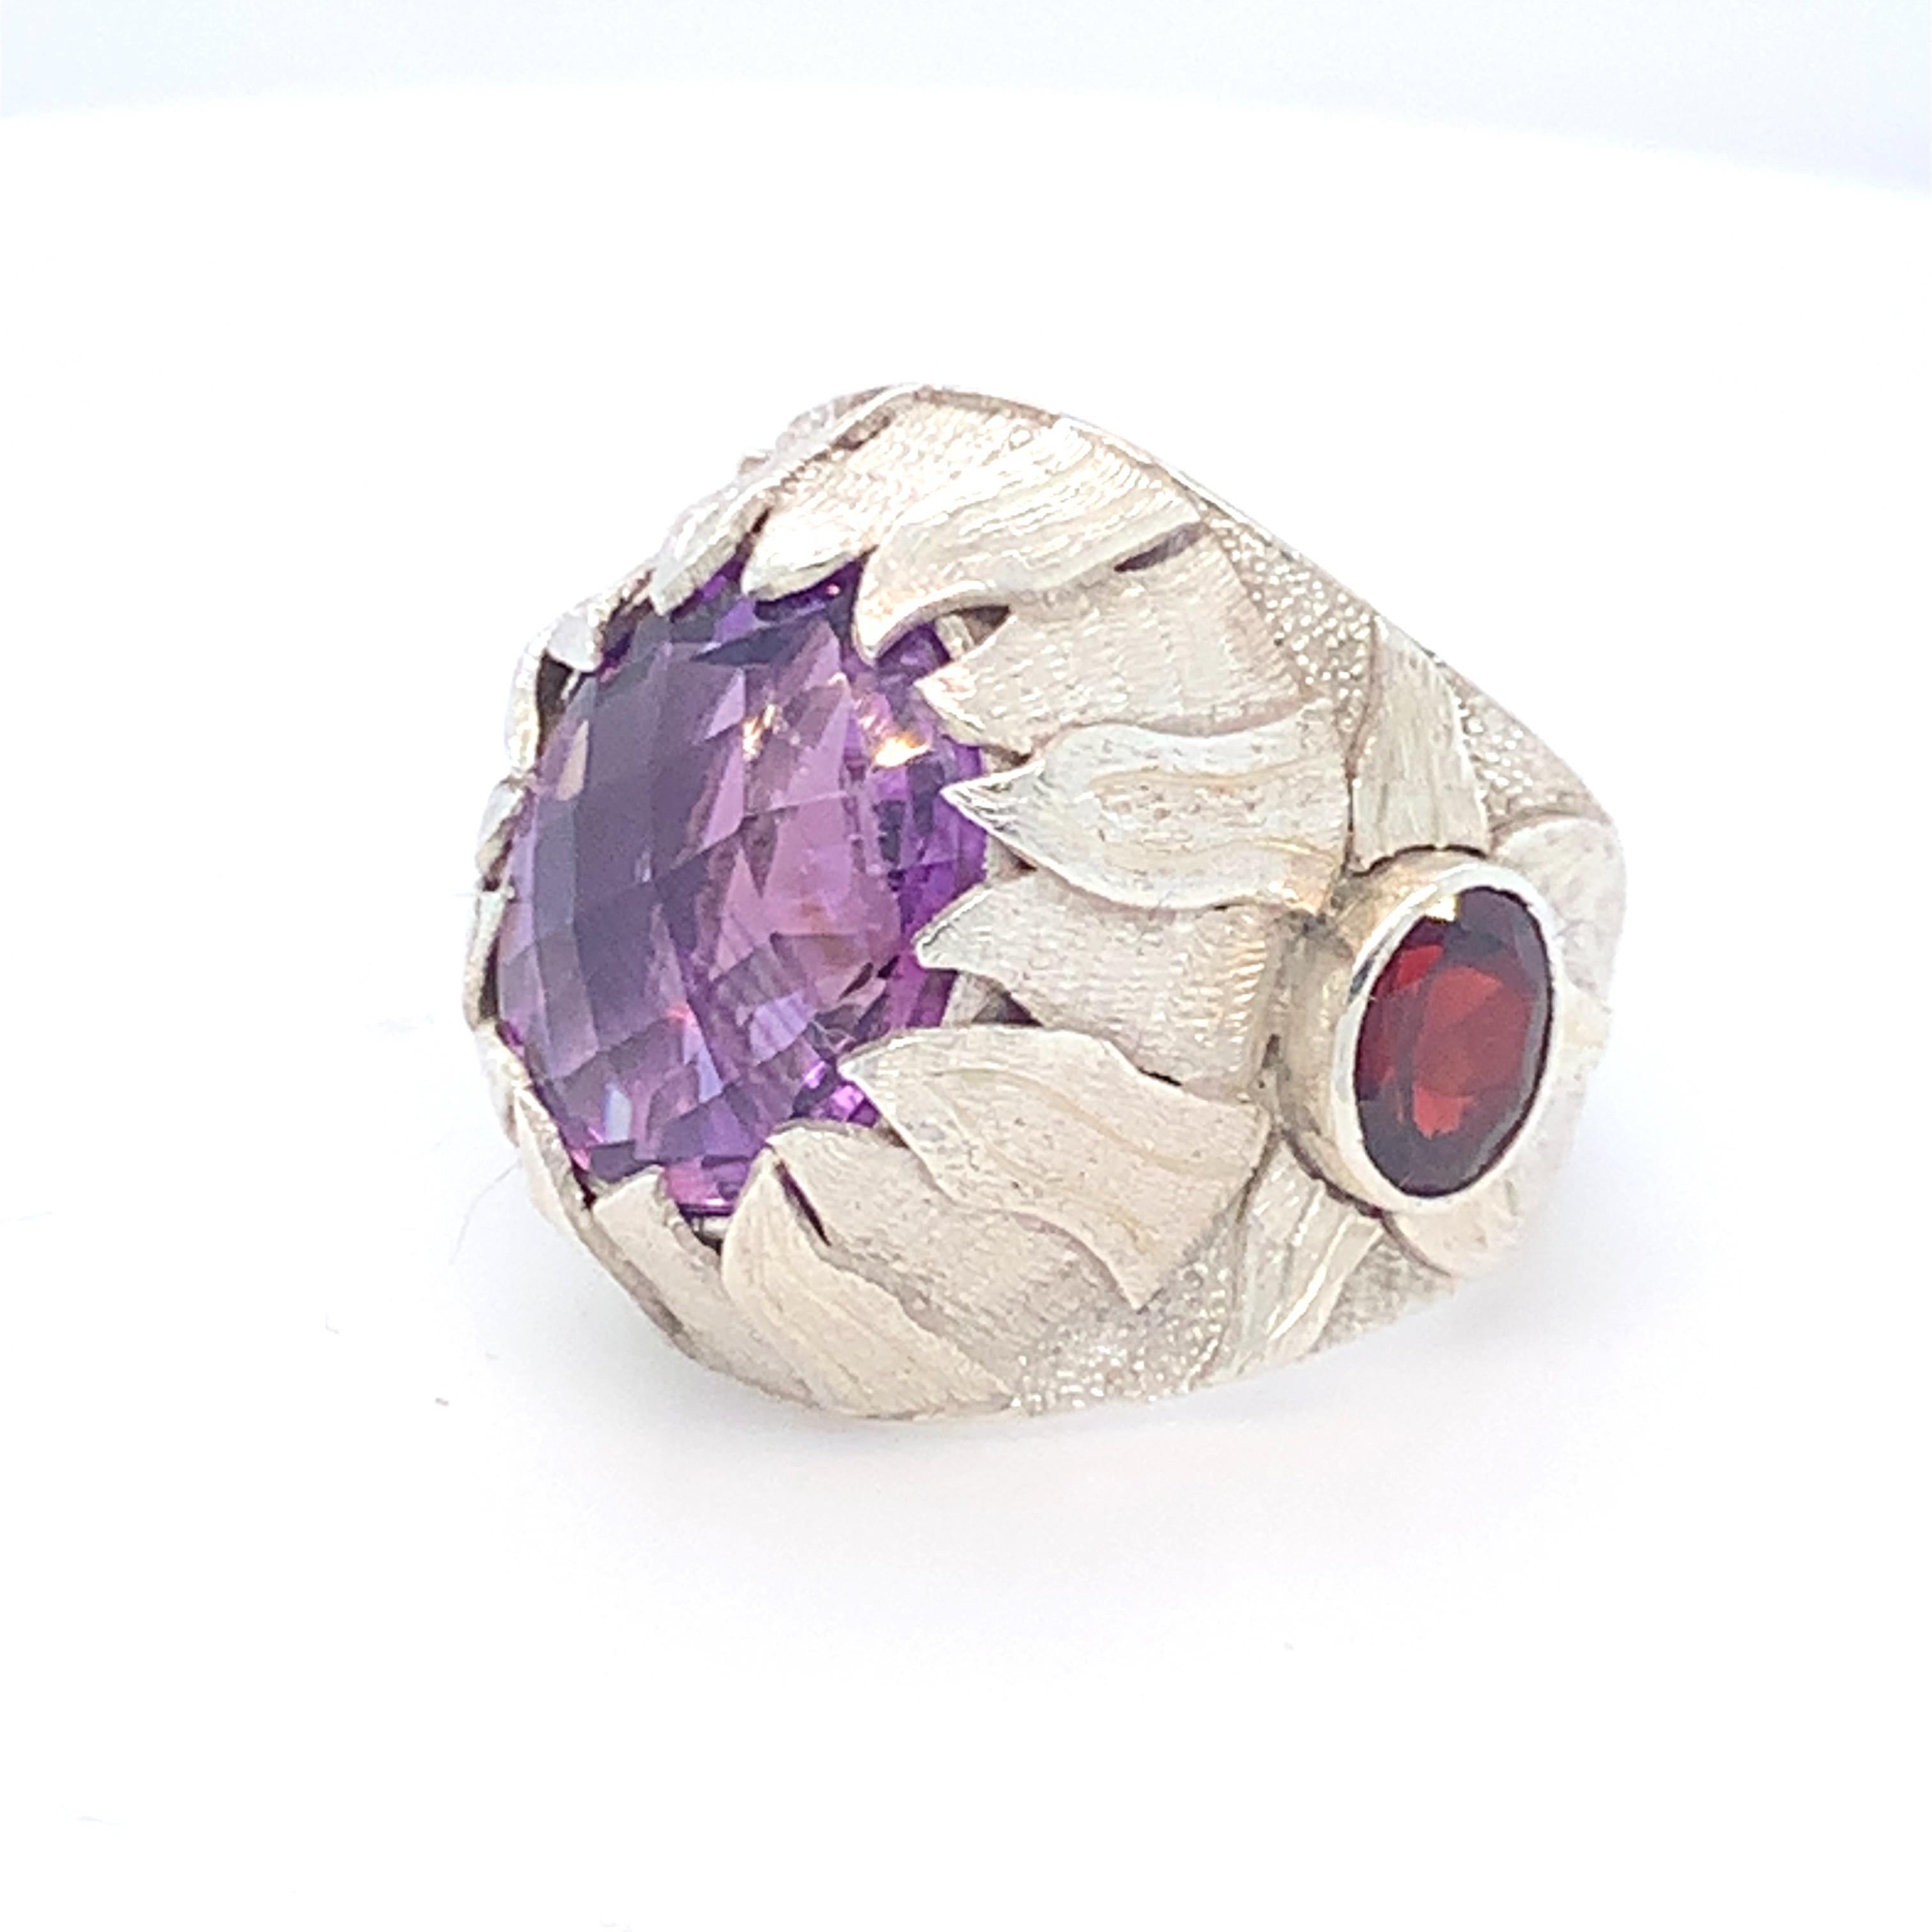 Oval natural Amethyst is the center stone of this cocktail ring. Checkerboard cut Amethyst is framed by artistically crafted flames of fire which makes it an exquisite ring . Small round garnets are set on the sides which enhances the beauty of this